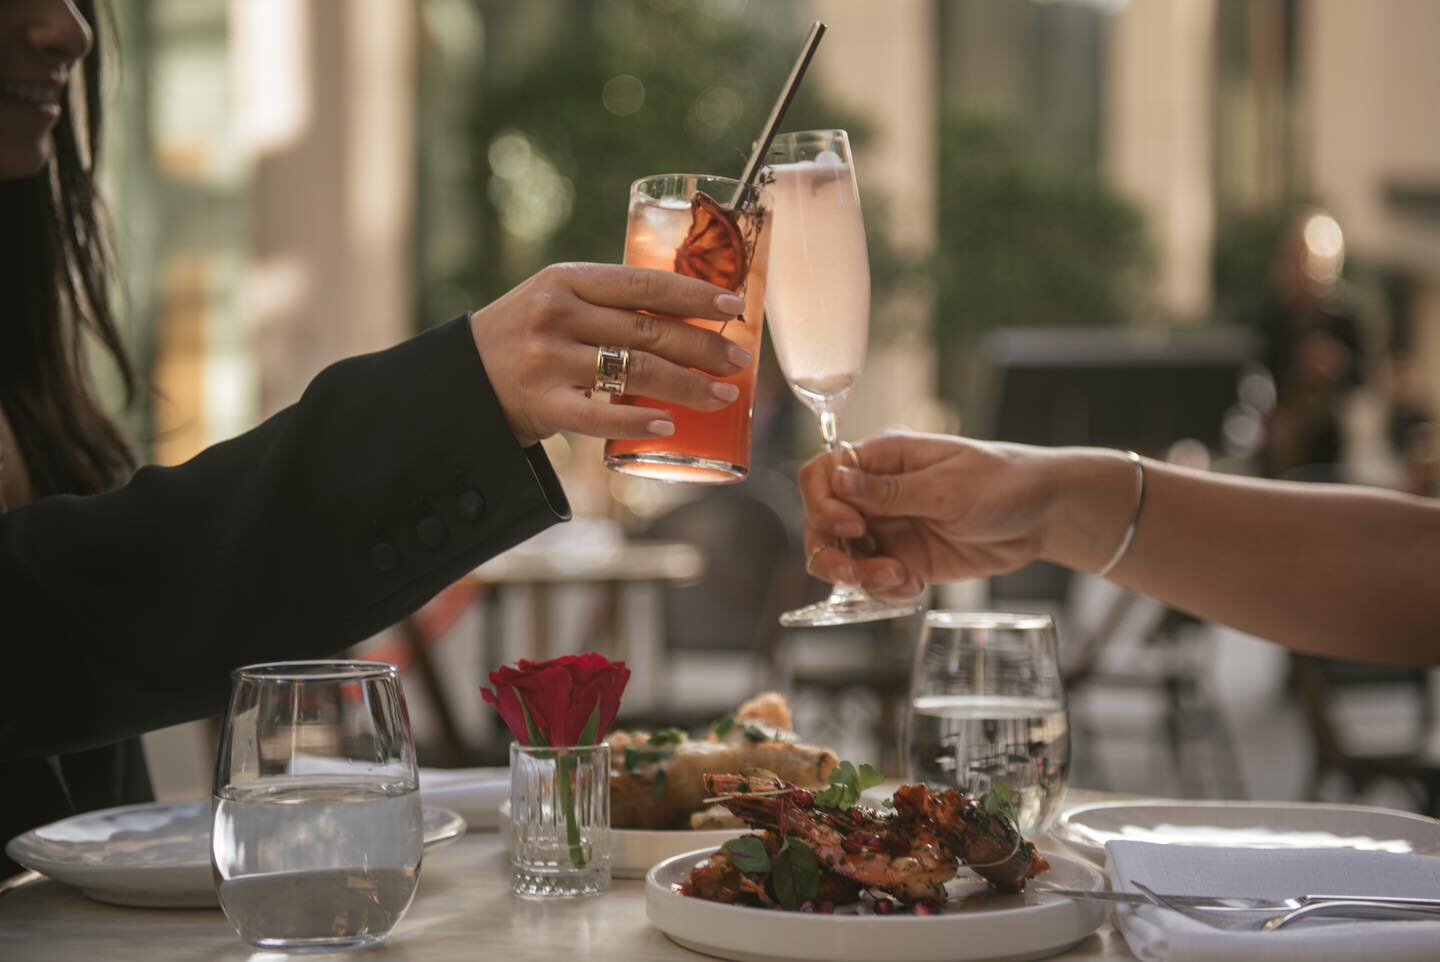 Join us today for summer filled cocktails, live music and delicious share plates. Your summer Lobby Bar experience awaits&hellip; 

#streetsofbarangaroo #sydneybars #sydneycocktails #barangaroo #sydneydrinks